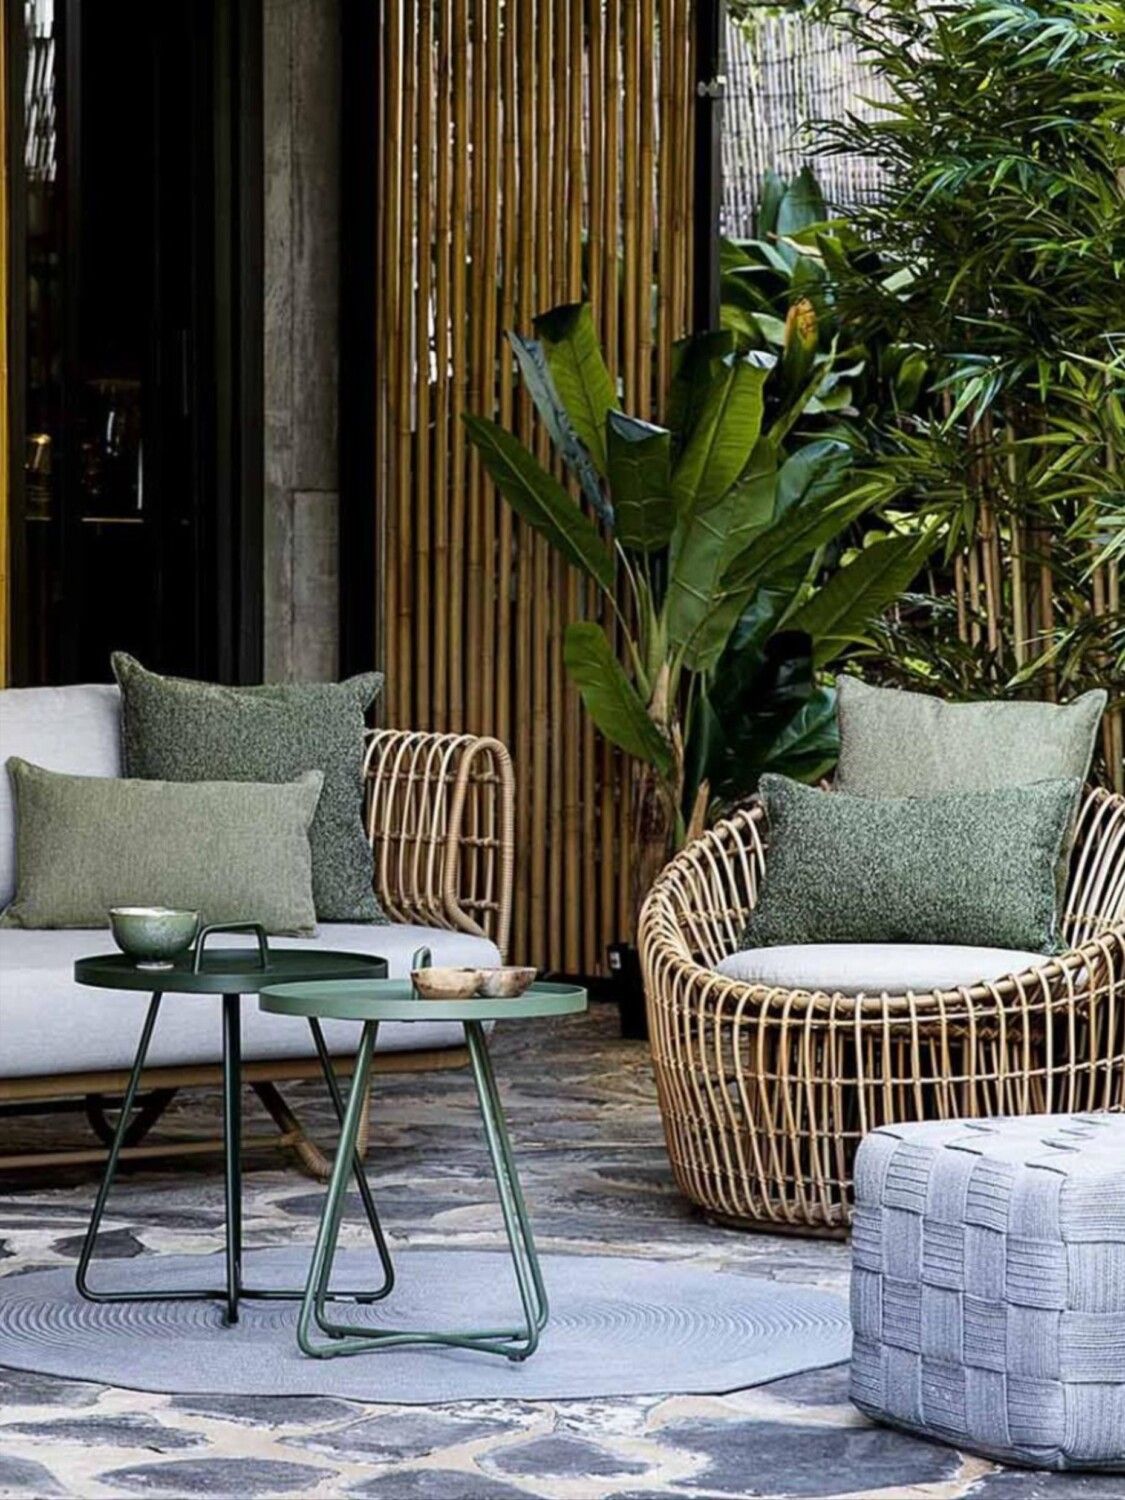 Enhance Your Outdoor Space with Rattan
Garden Furniture